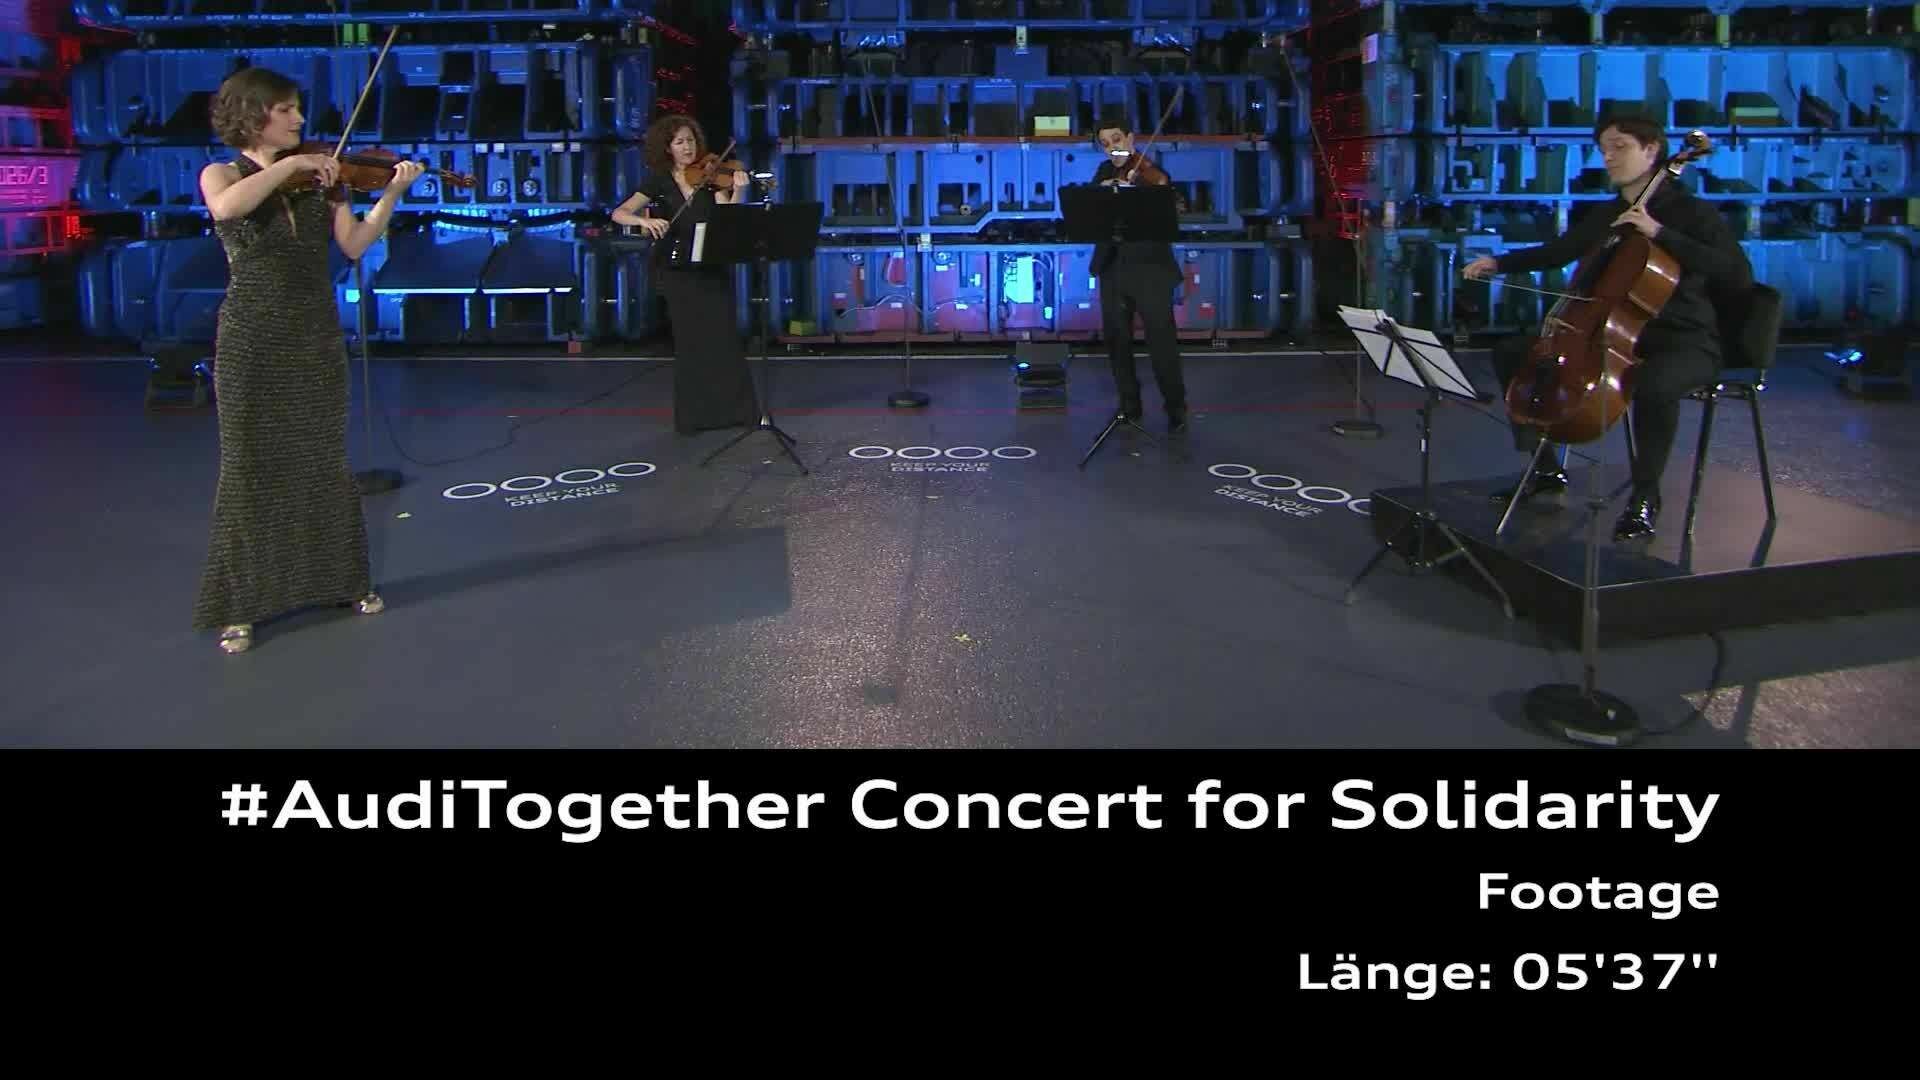 Footage: Concert for Solidarity